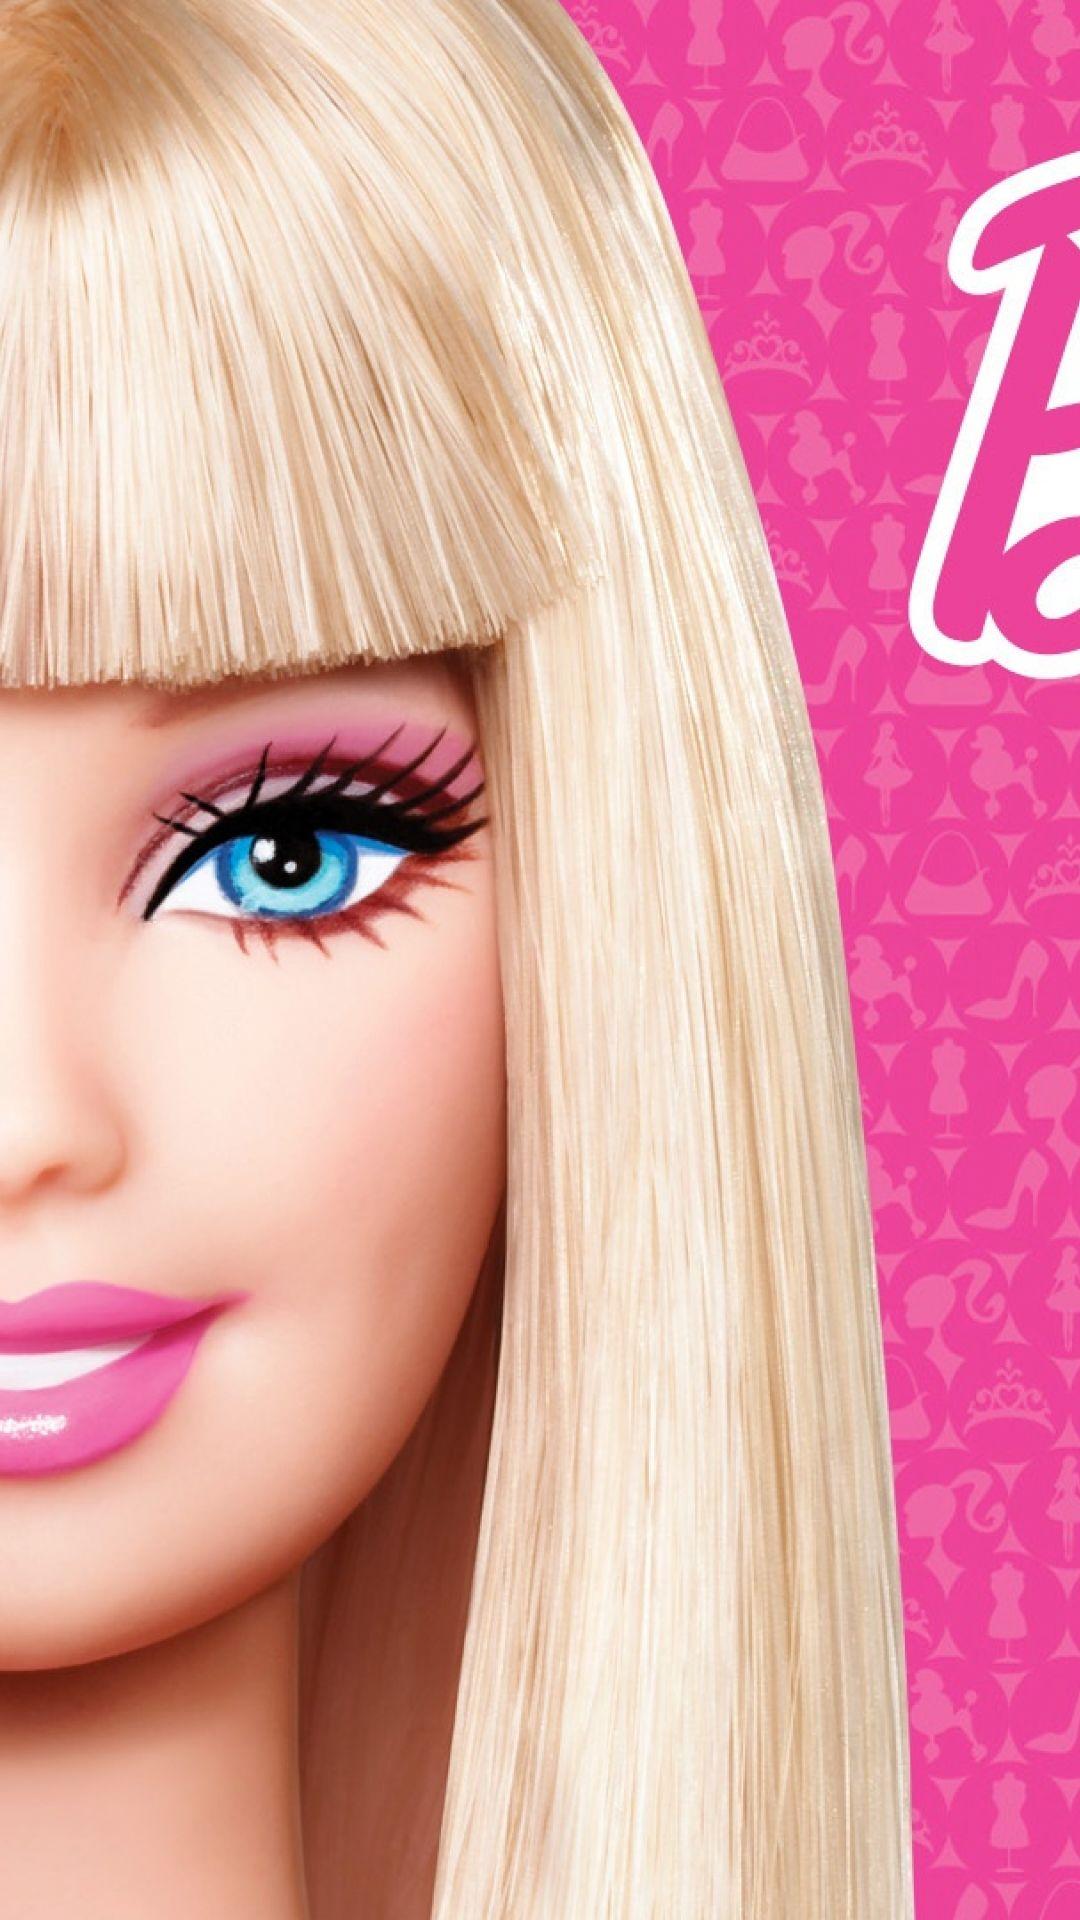 Barbie Wallpaper For iPhone